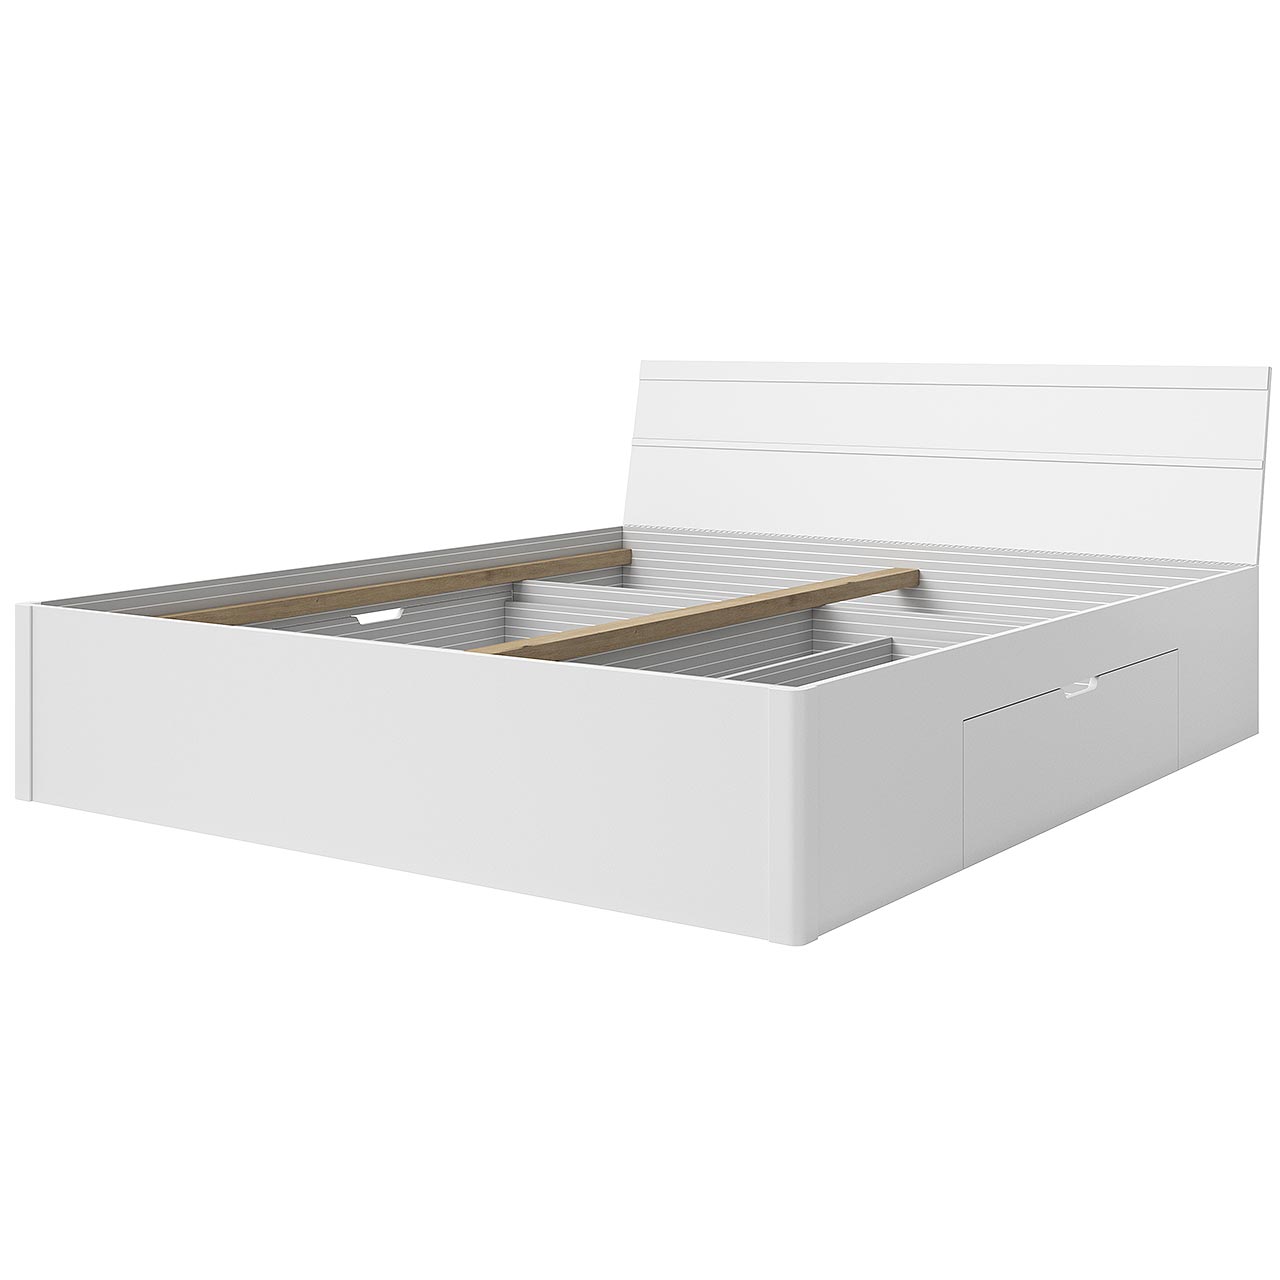 Bed with drawers 180x200 BETA BE52 white